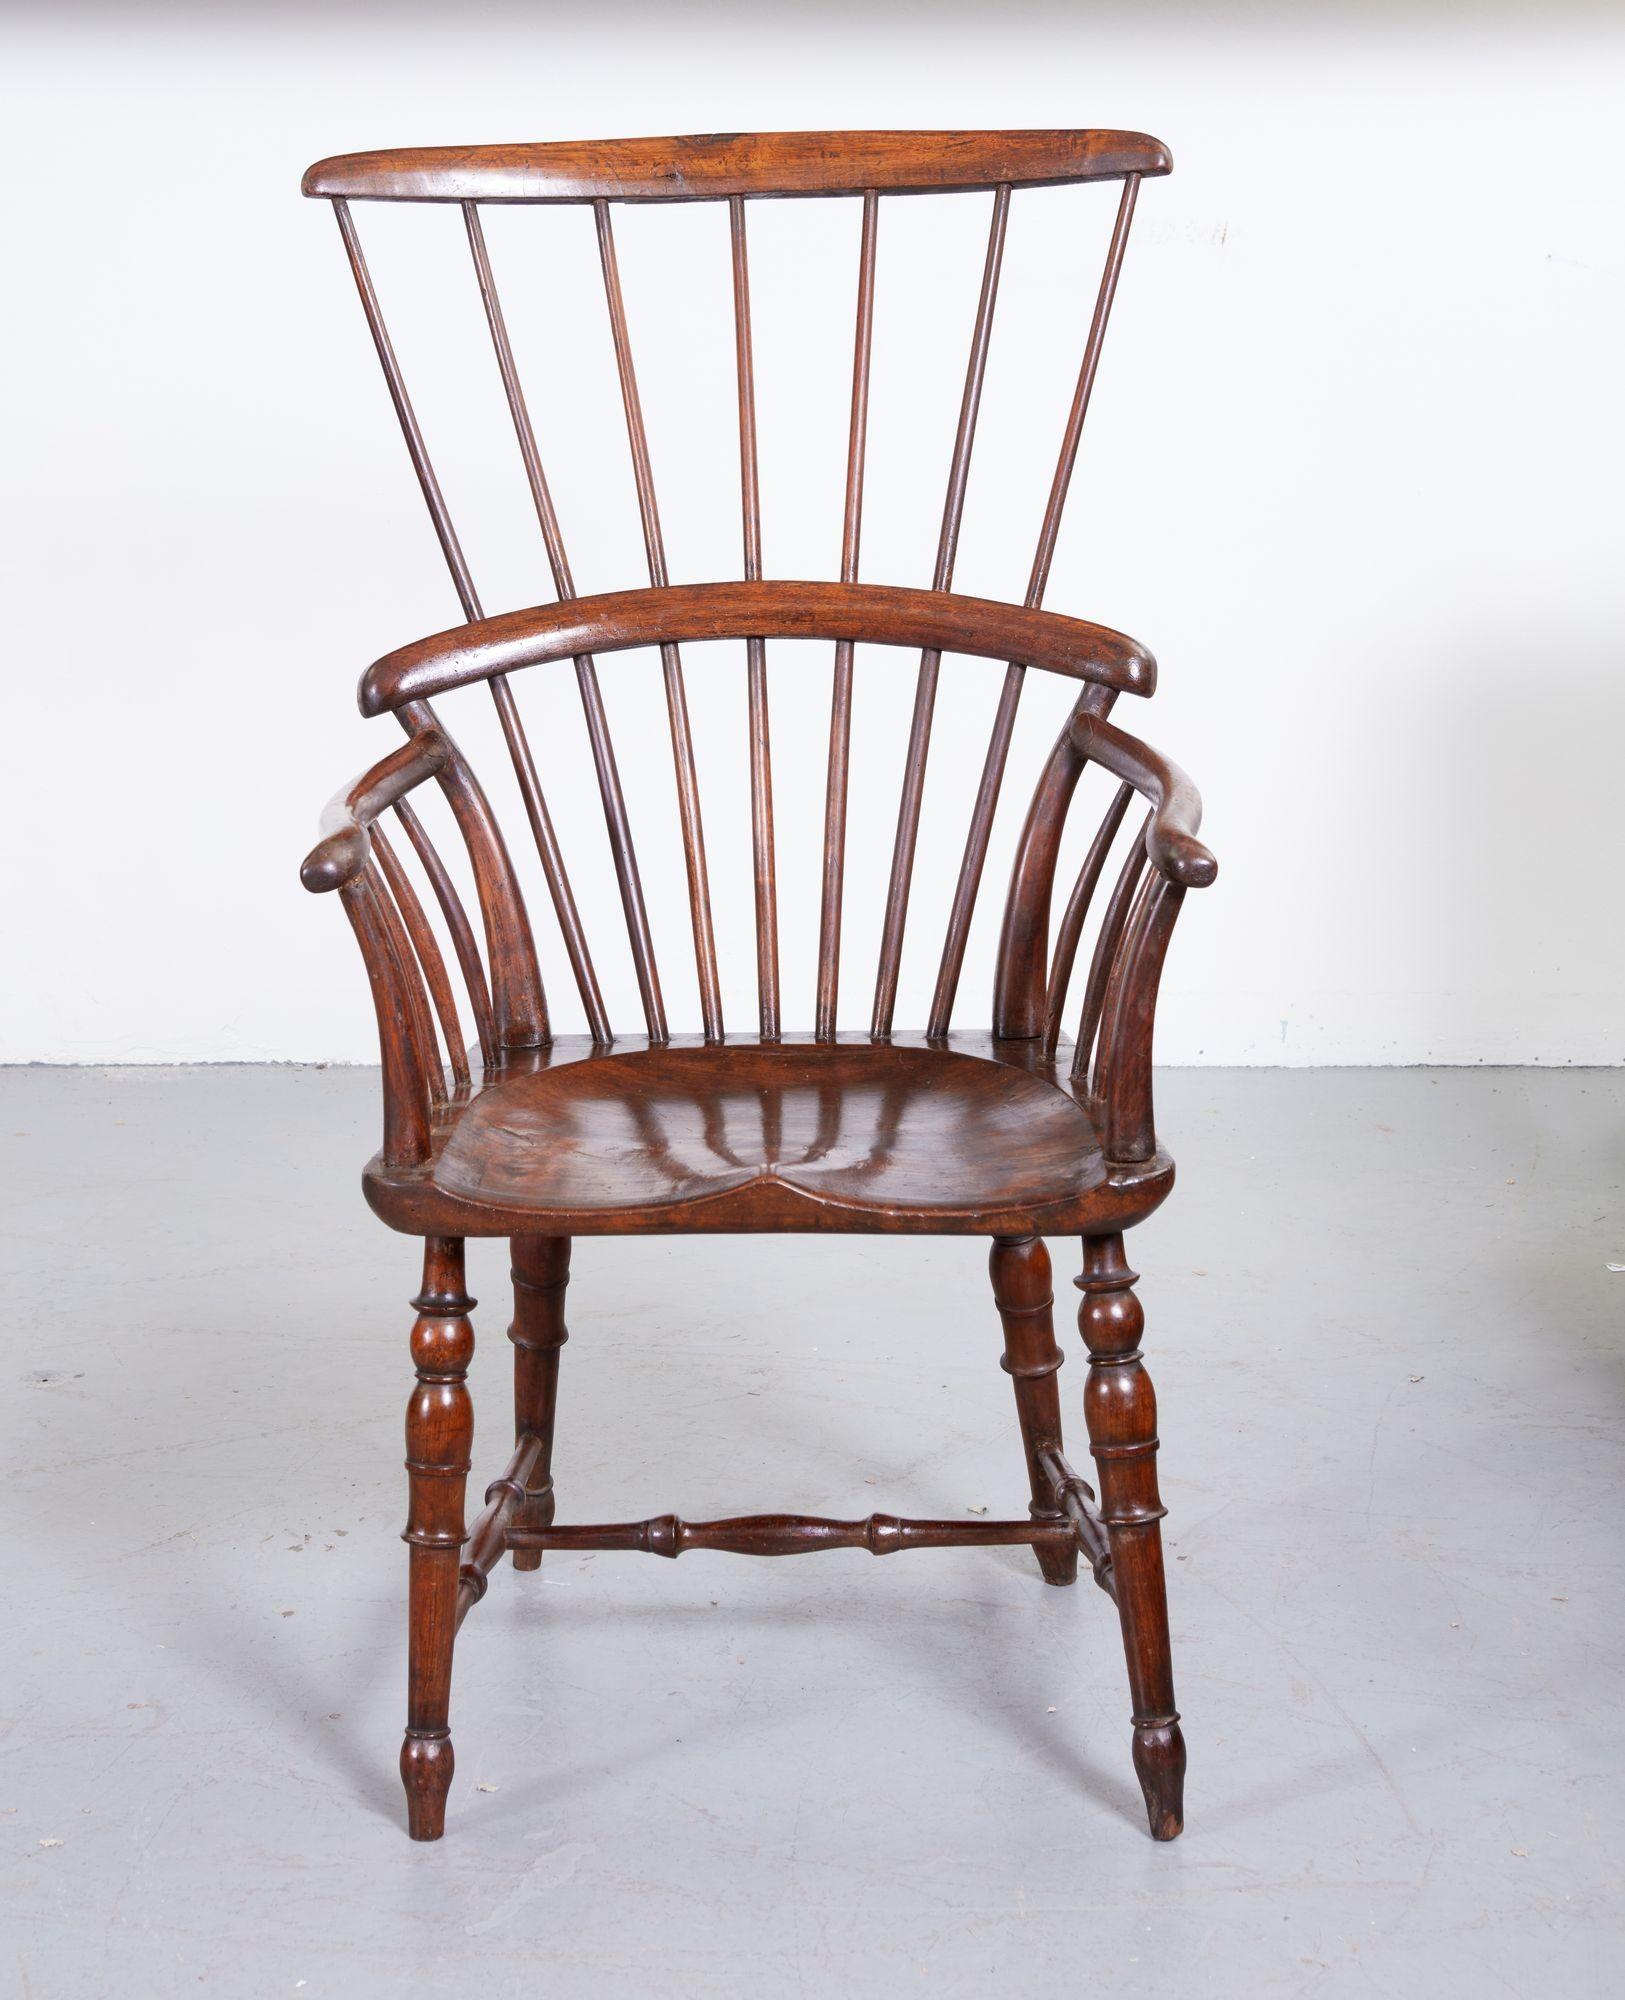 Unusual English early 19th Century fruitwood Windsor comb back armchair, the simple crest over seven flared spindles, the lower comb over curved arms supported by curved spindles over deeply saddled single plank seat, over finely turned legs joined